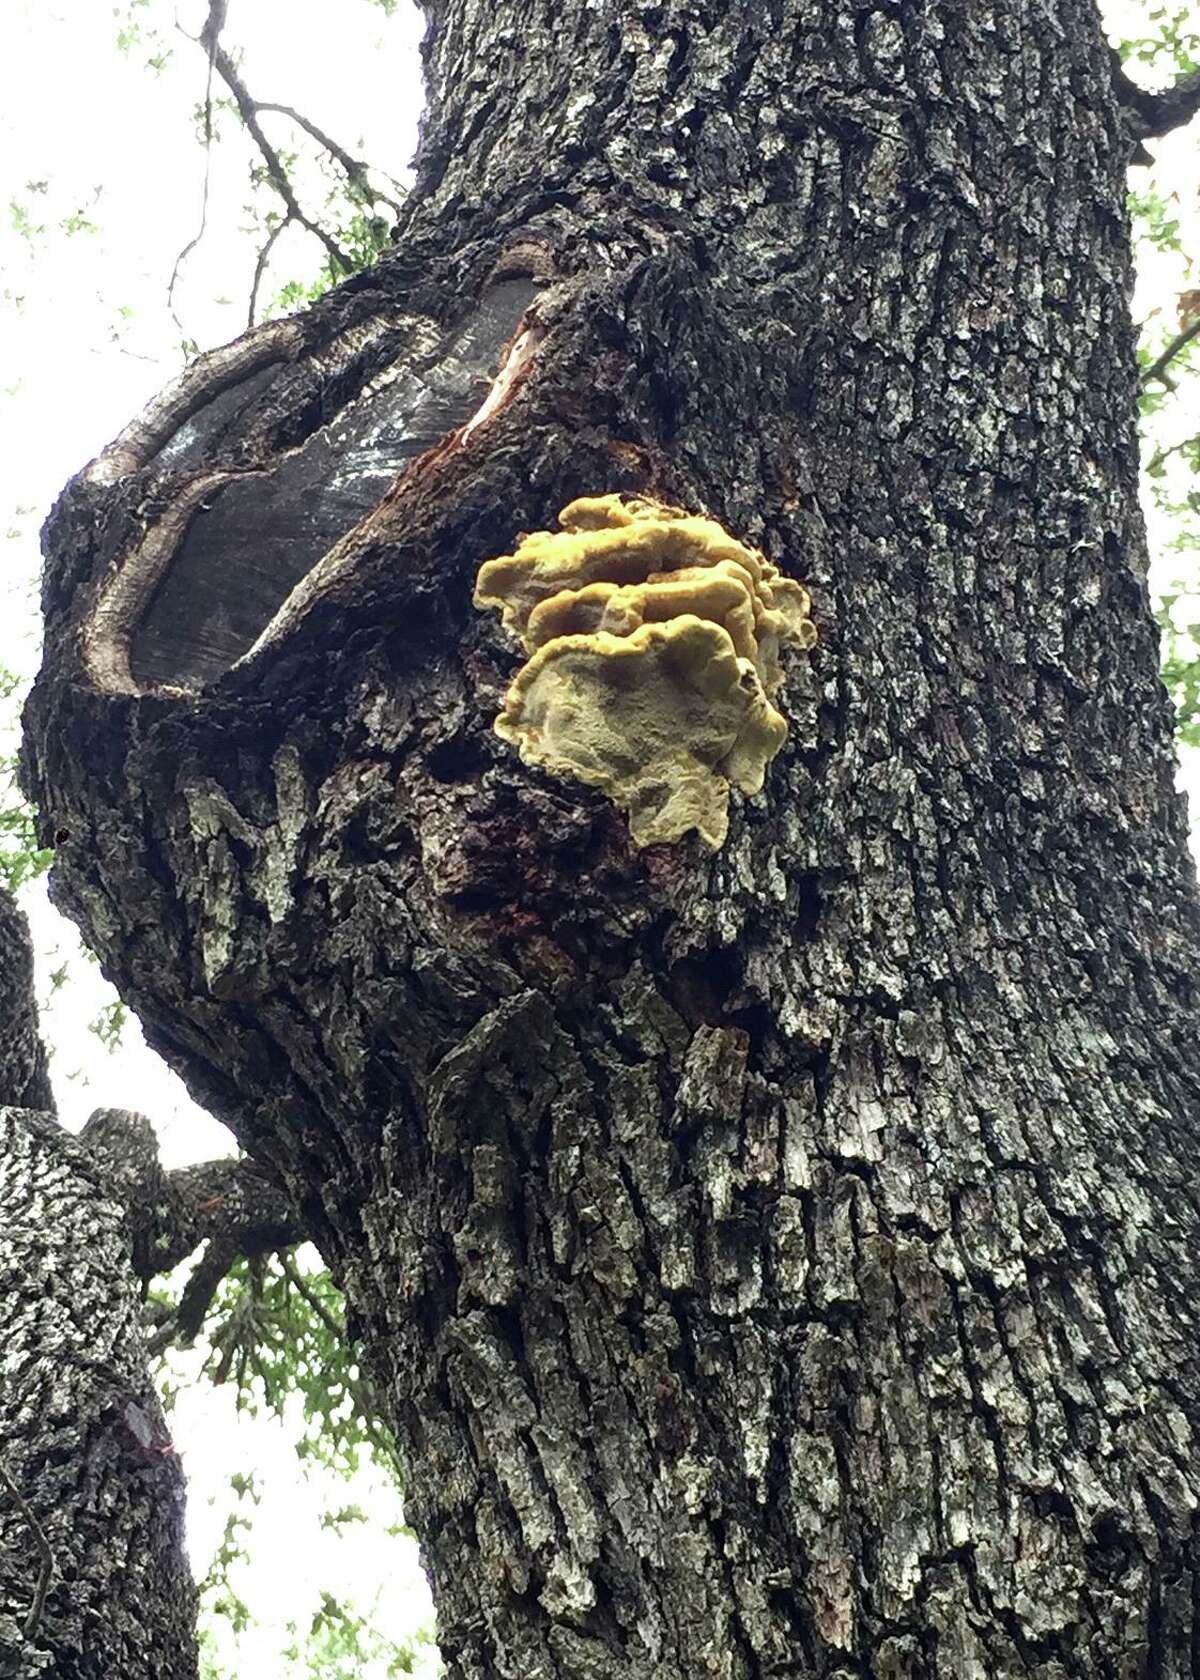 This is a fungal conk, probably from the genus Ganoderma, and it indicates severe internal decay within the trunk and great likelihood that the trunk will blow over in a windstorm sometime in the coming years.